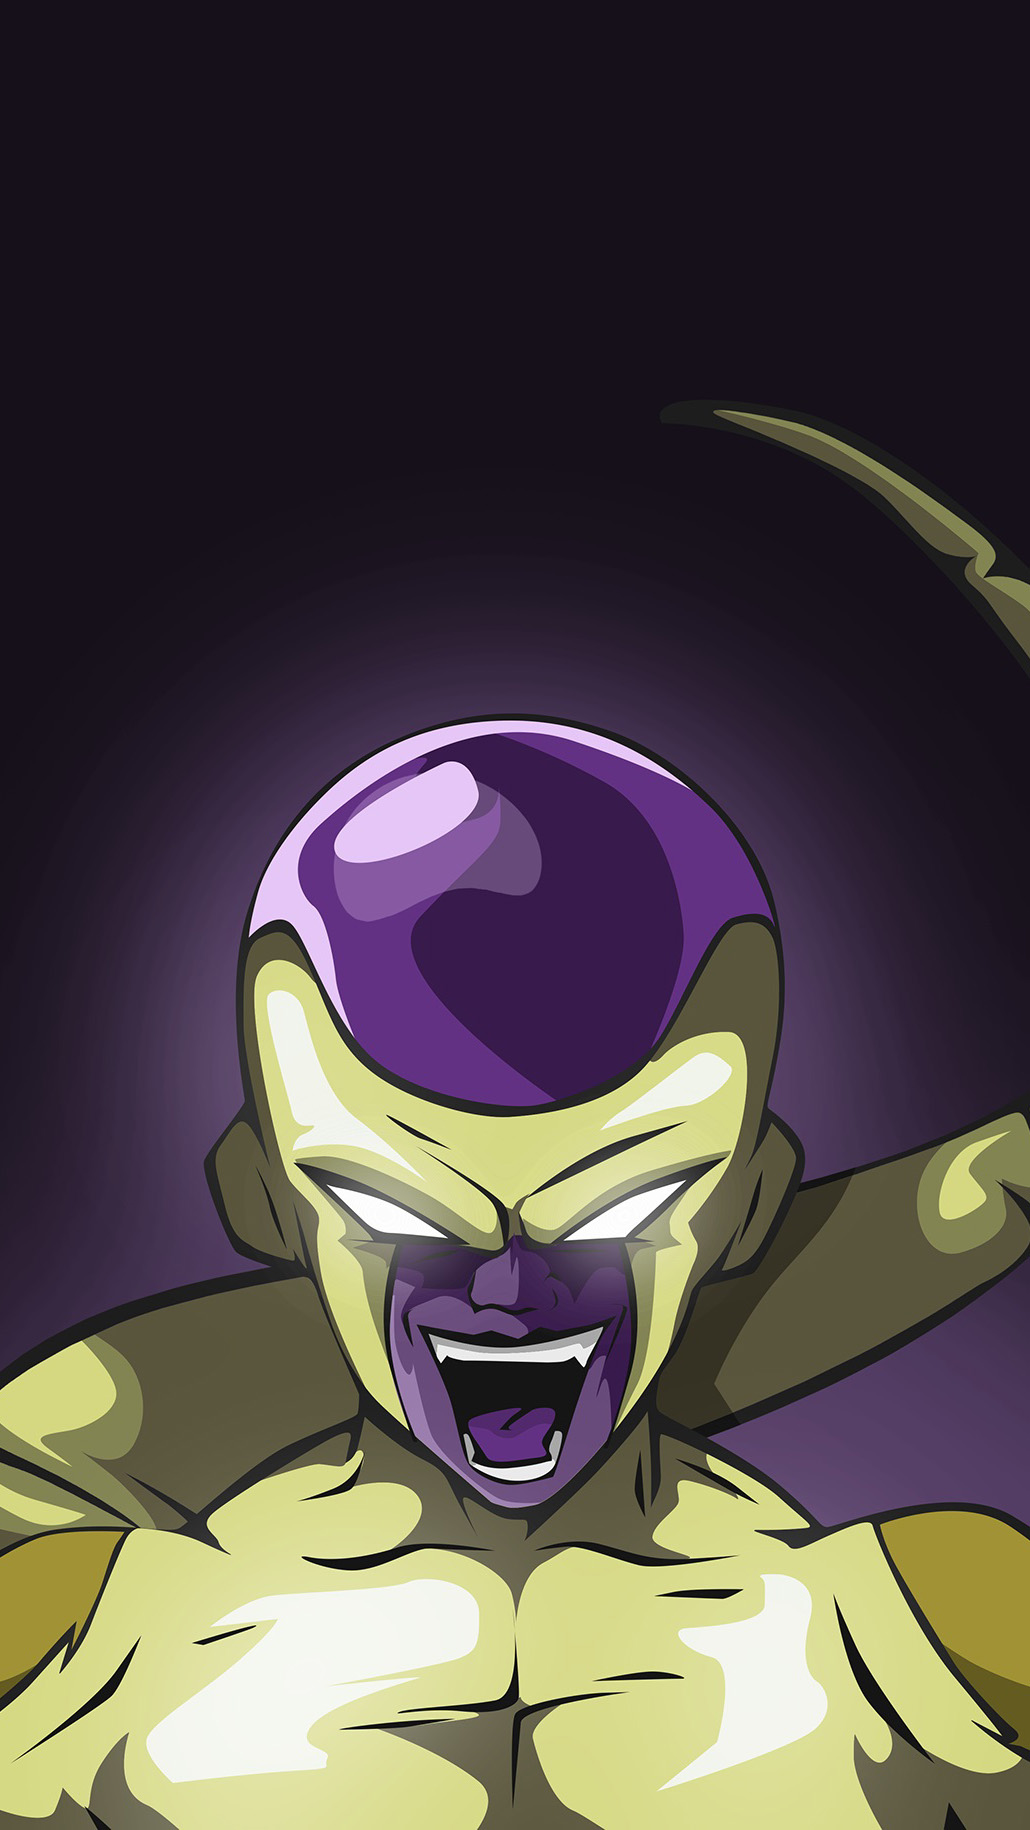 Download Golden Frieza wallpaper by LordFrieza  17  Free on ZEDGE now  Browse millions of popular  Anime dragon ball goku Dragon ball painting  Dragon ball z